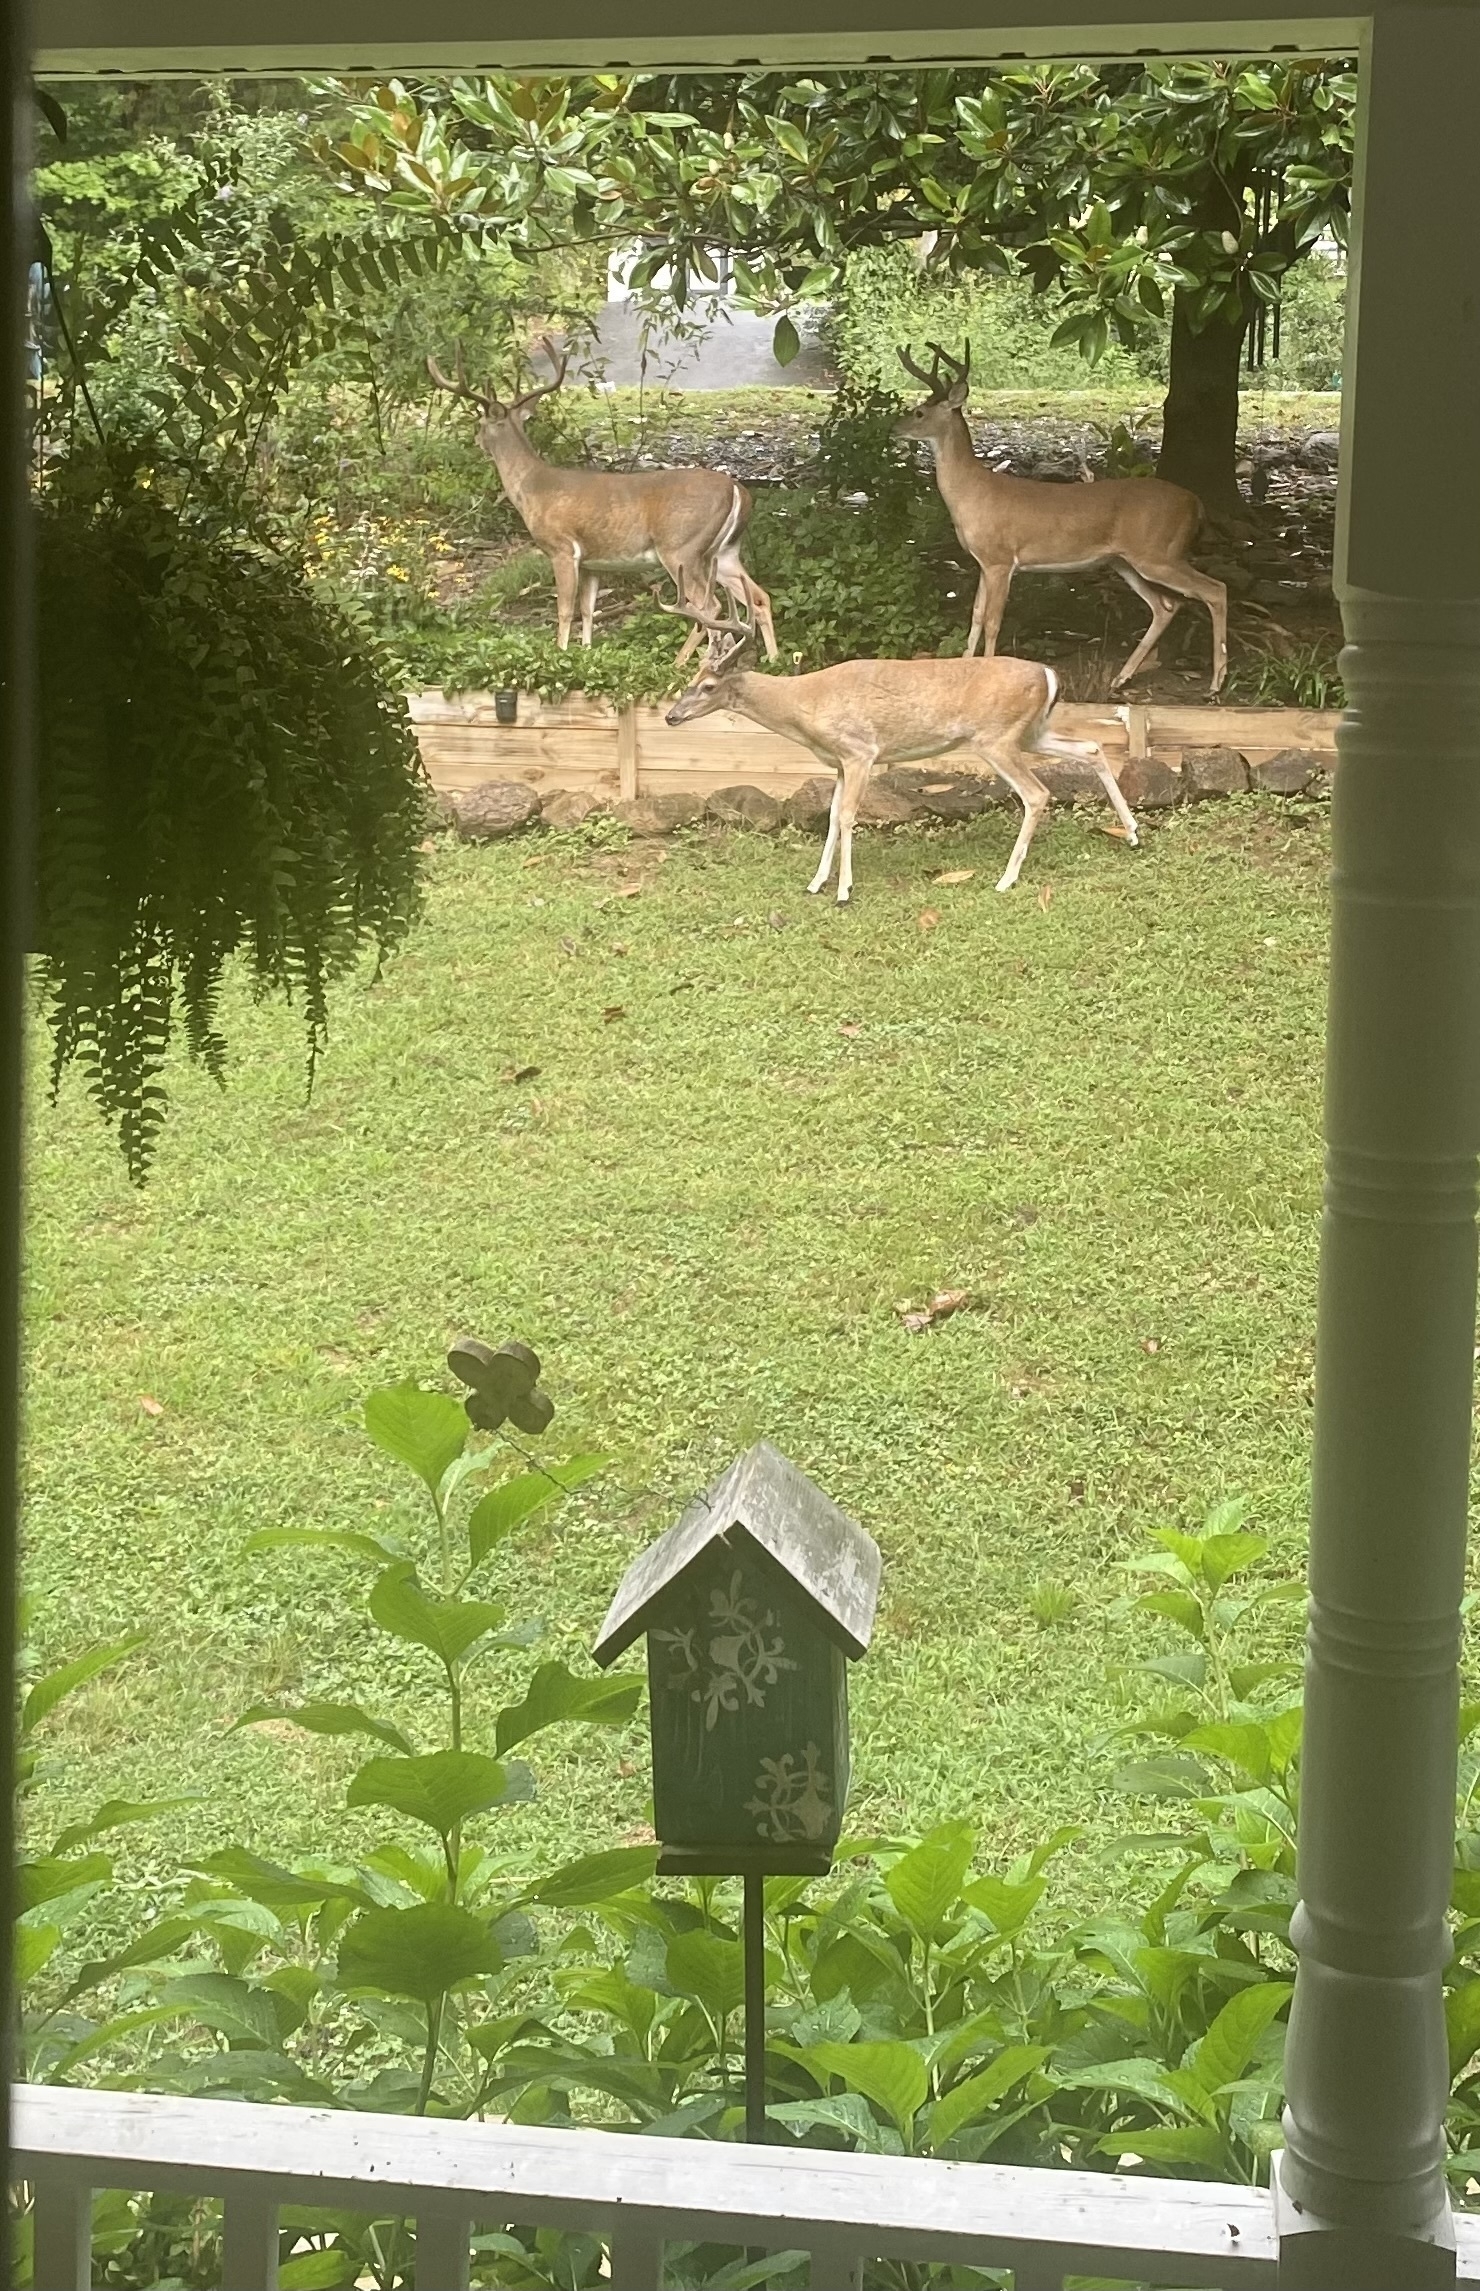 Three deer foraging in our yard. My wife wasn’t happy with them eating her plants!